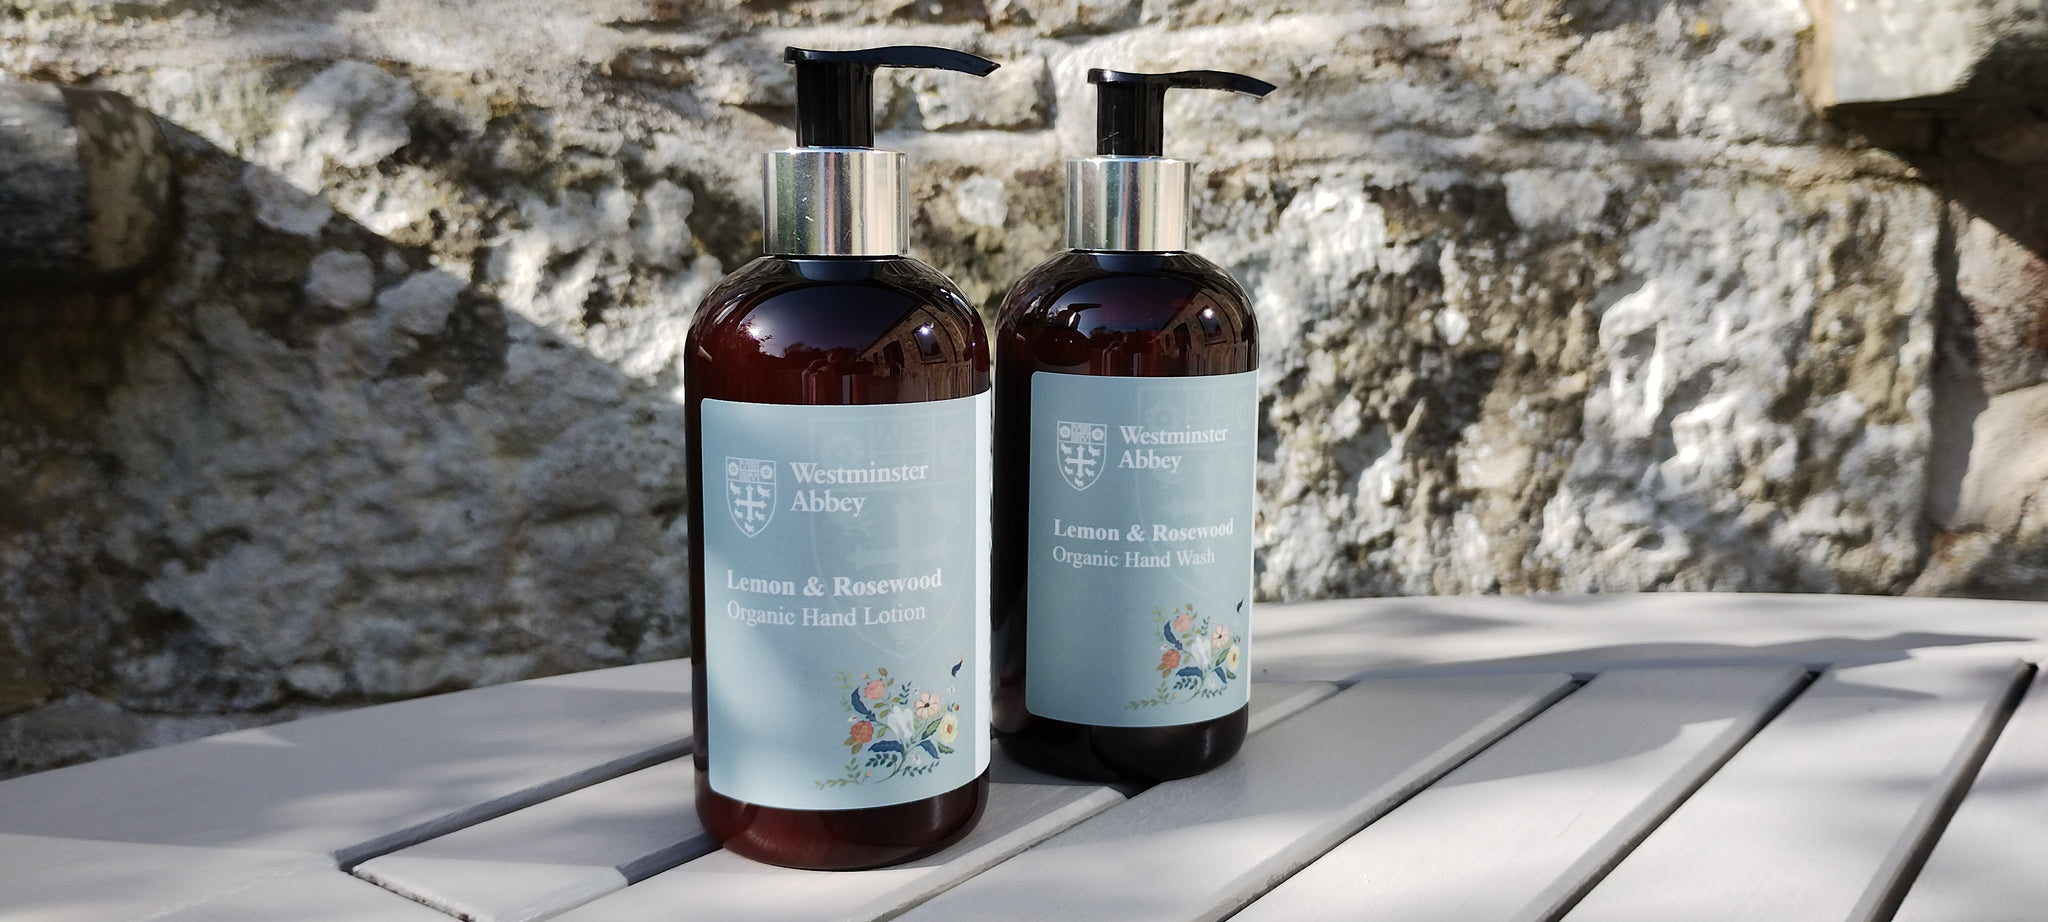 natural hand soap and hand lotion produced for westminster abbey by conscious skincare